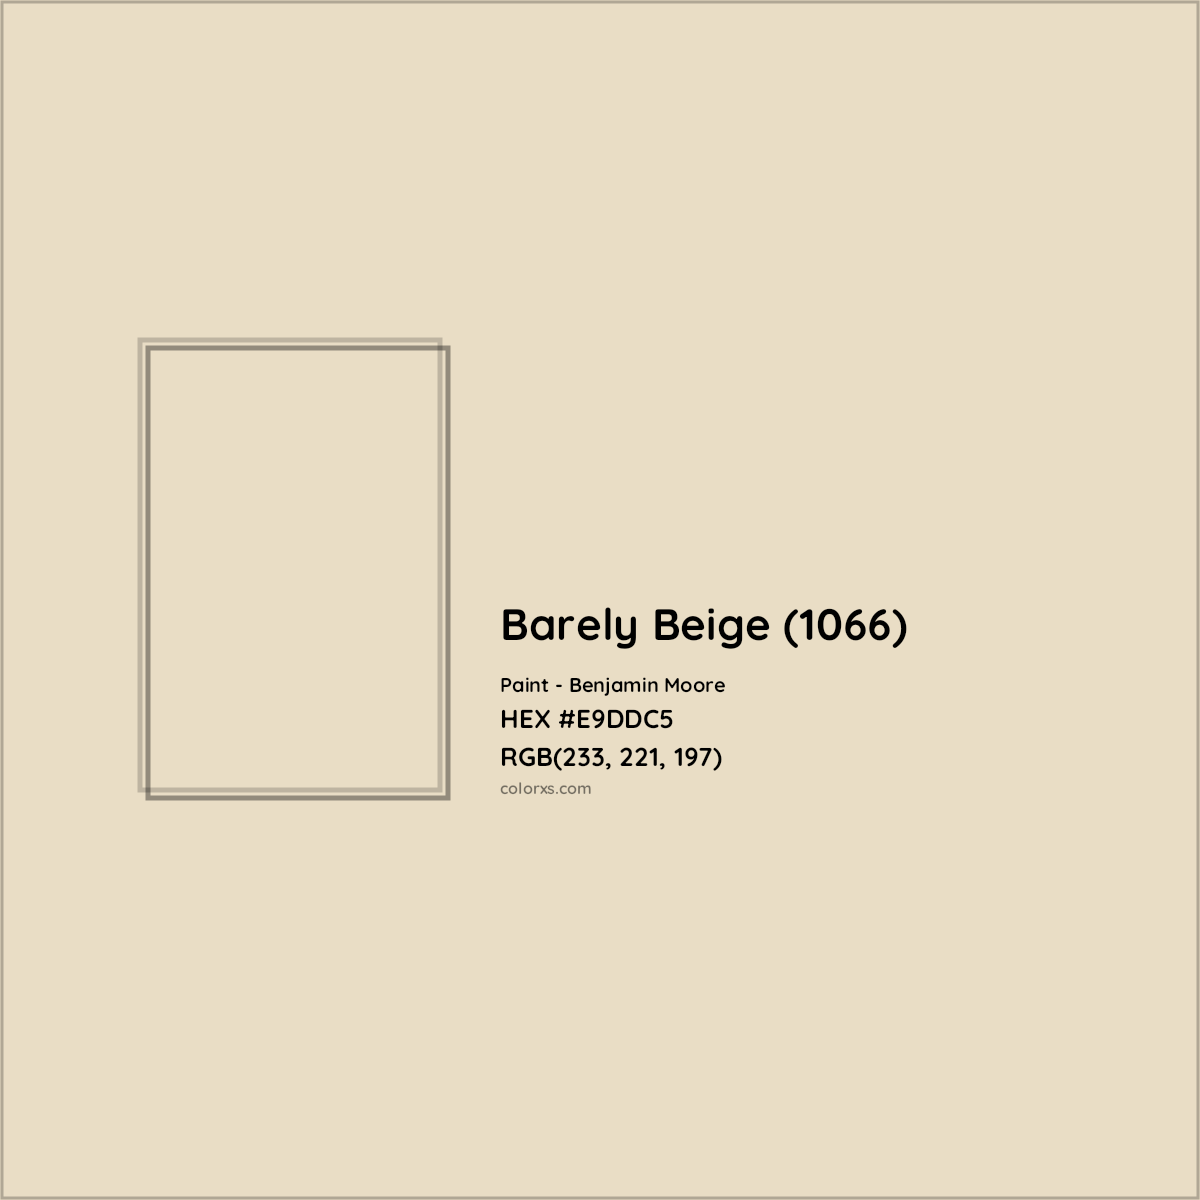 Benjamin Moore Barely Beige (1066) Paint color codes, similar paints and  colors 